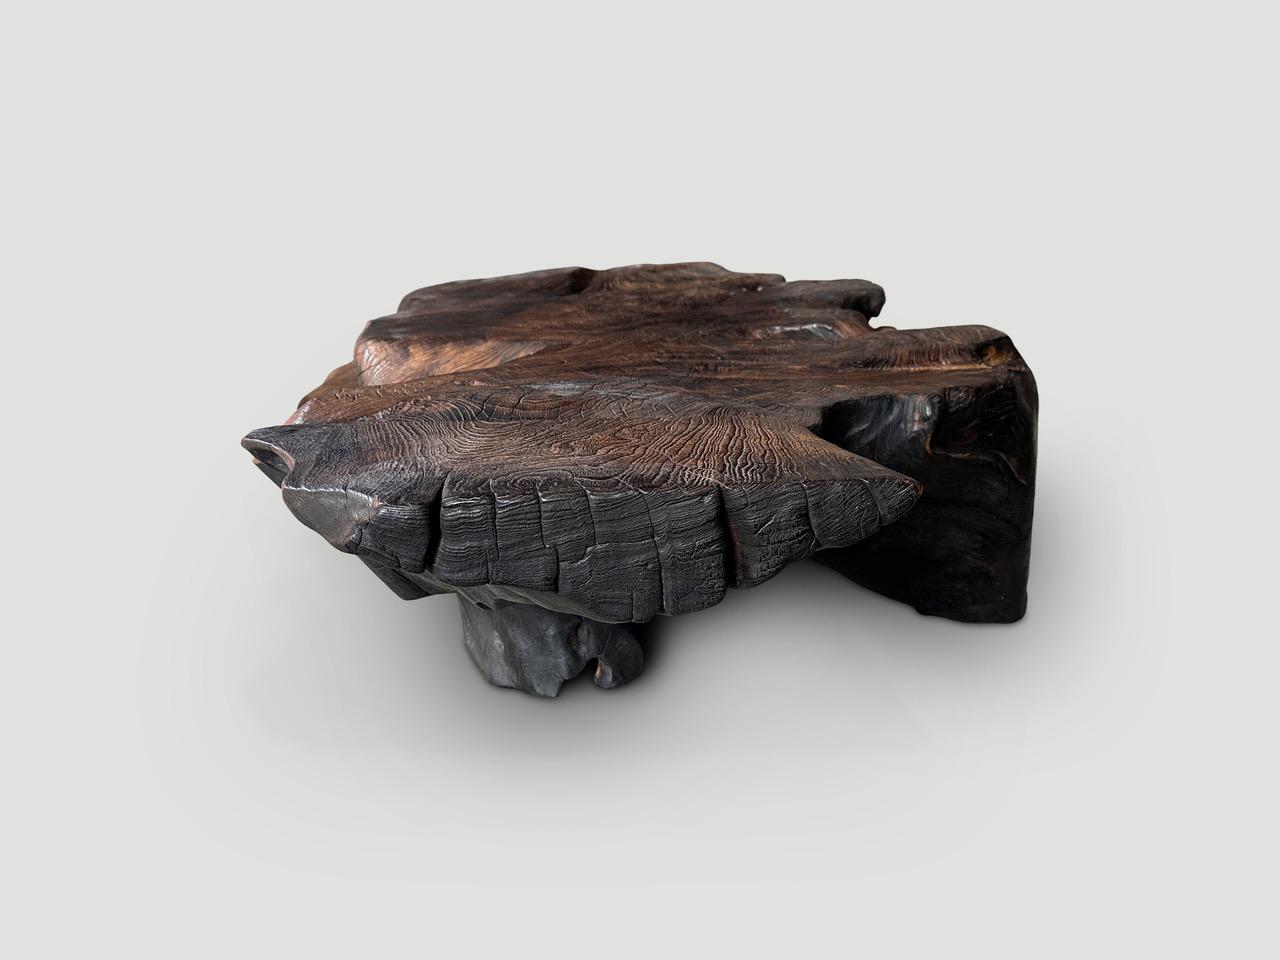 Impressive natural organic formed reclaimed teak coffee table both usable and sculptural. The legs and top are carved out of one teak root and charred to a rich chocolate brown. Finally we rubbed the top with a wire brush revealing the beautiful